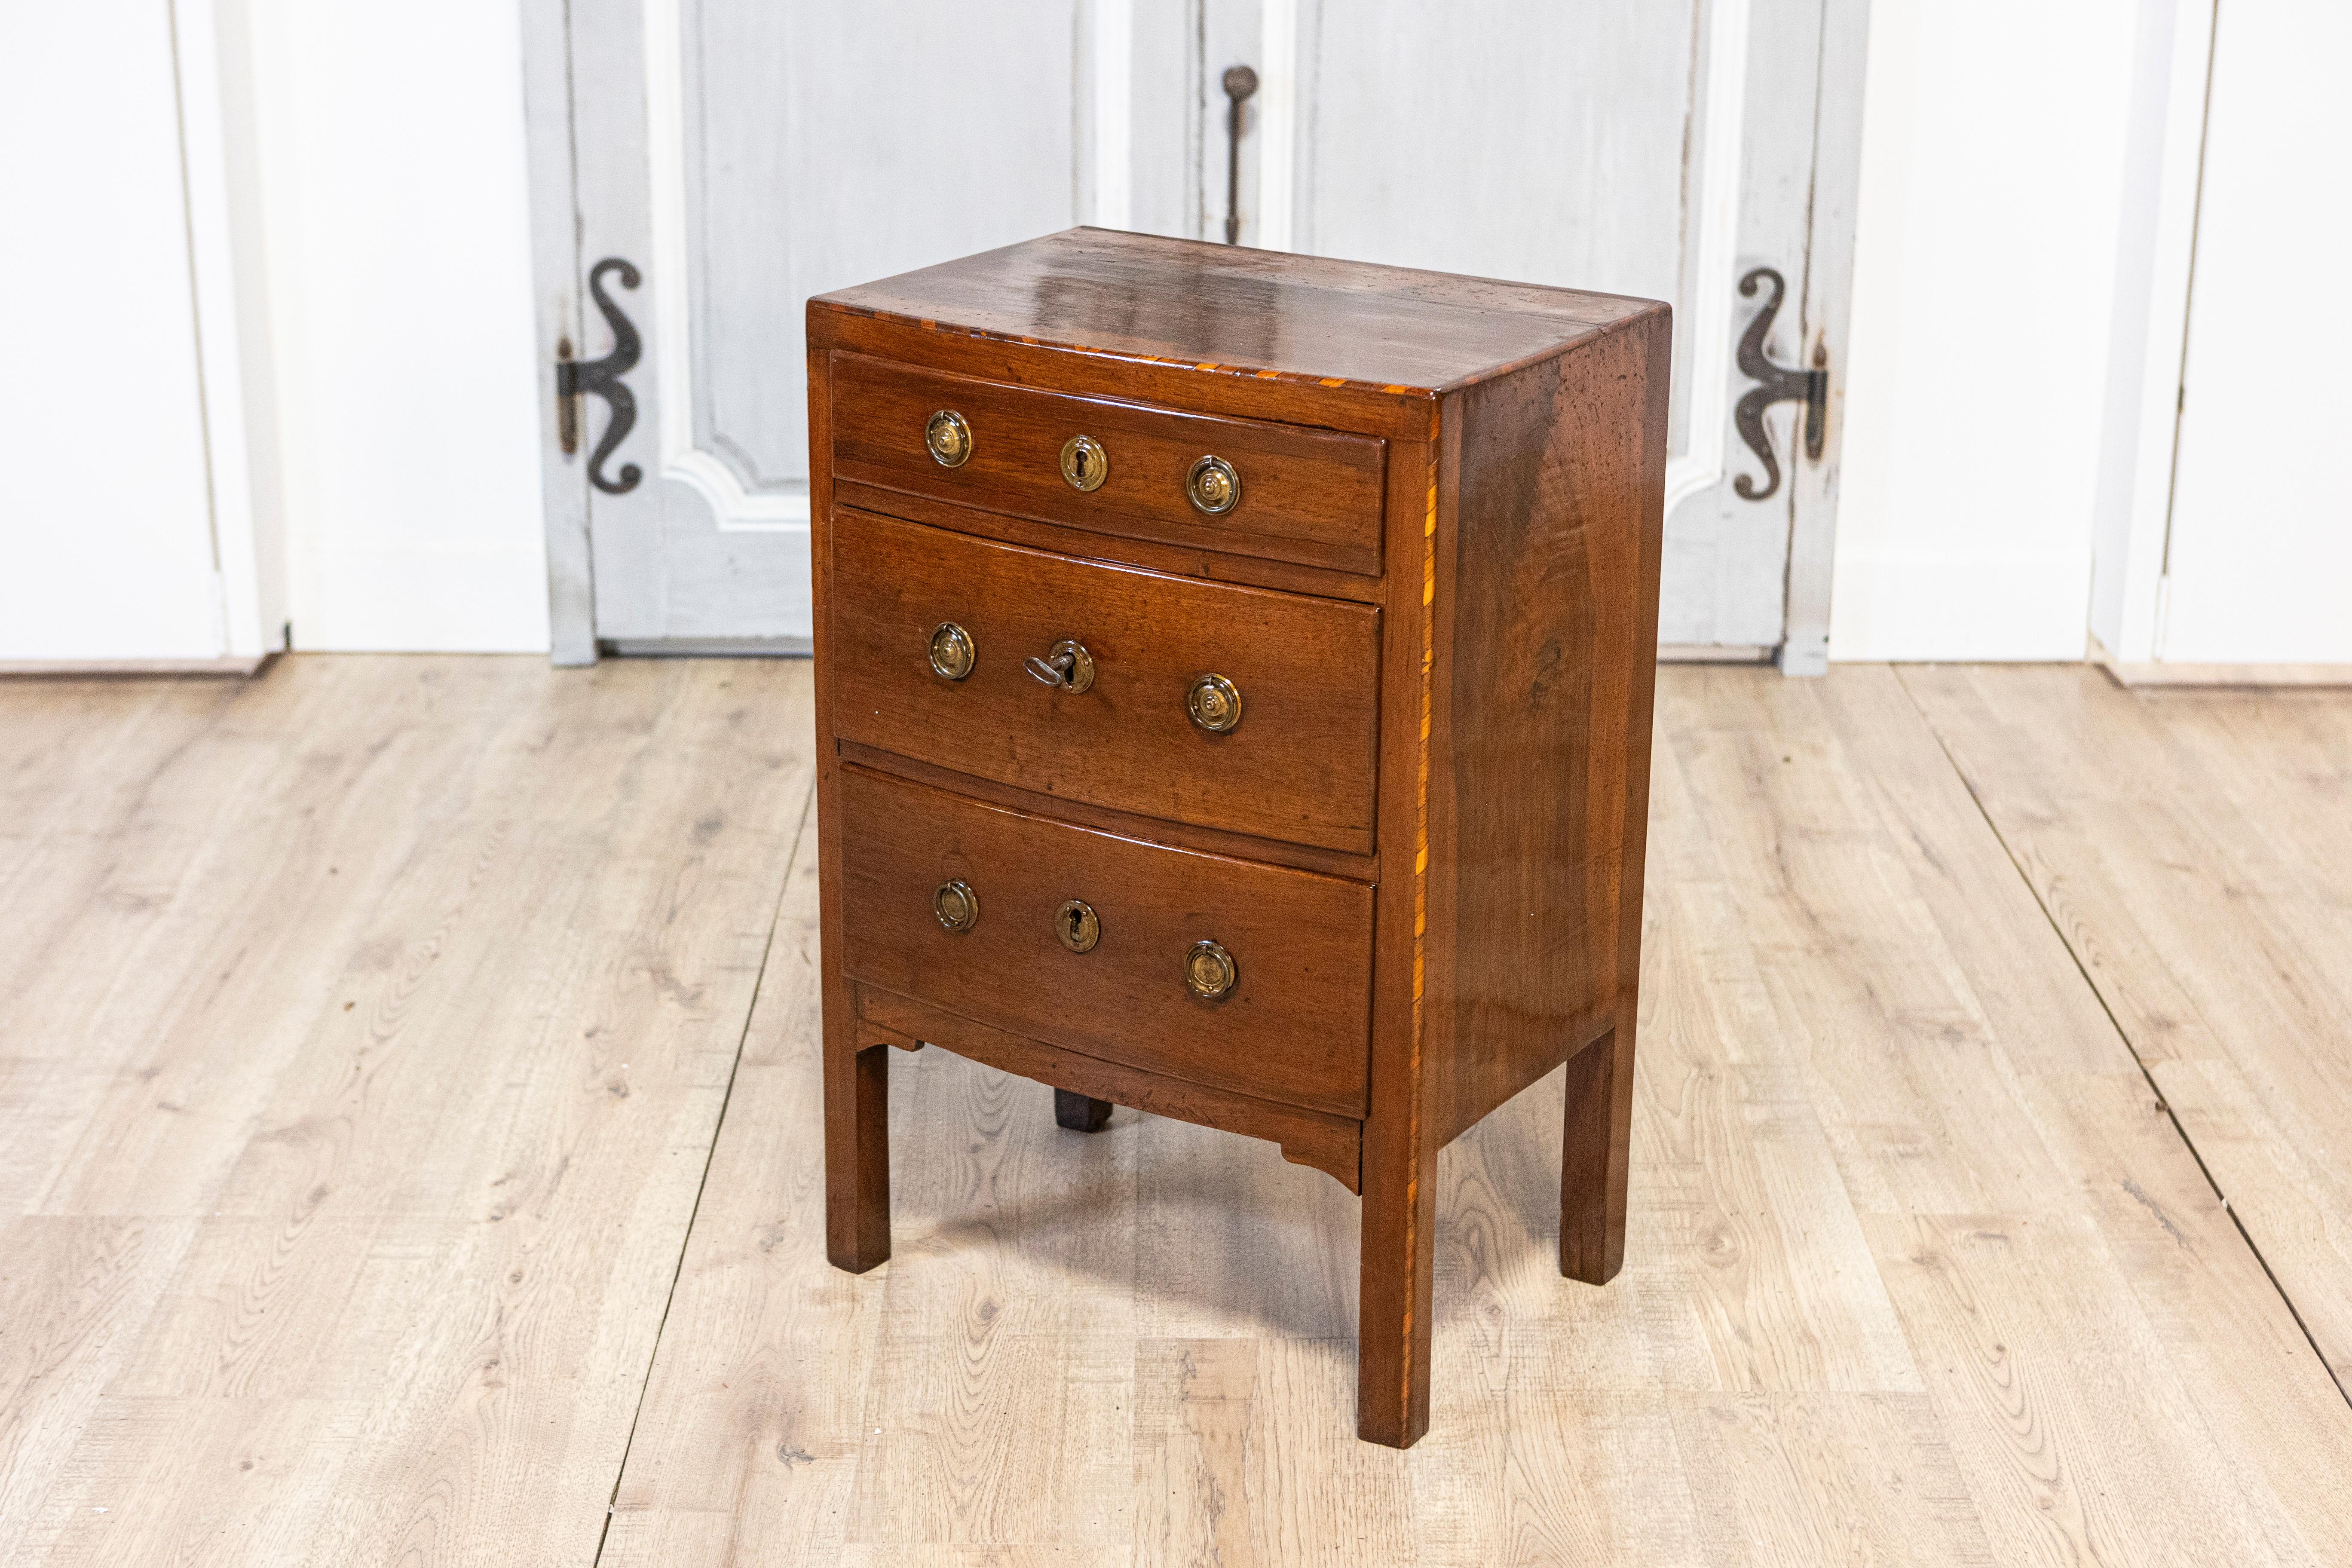 Italian Walnut Early 19th Century Three-Drawer Bedside Chest from Vicenza  In Good Condition For Sale In Atlanta, GA